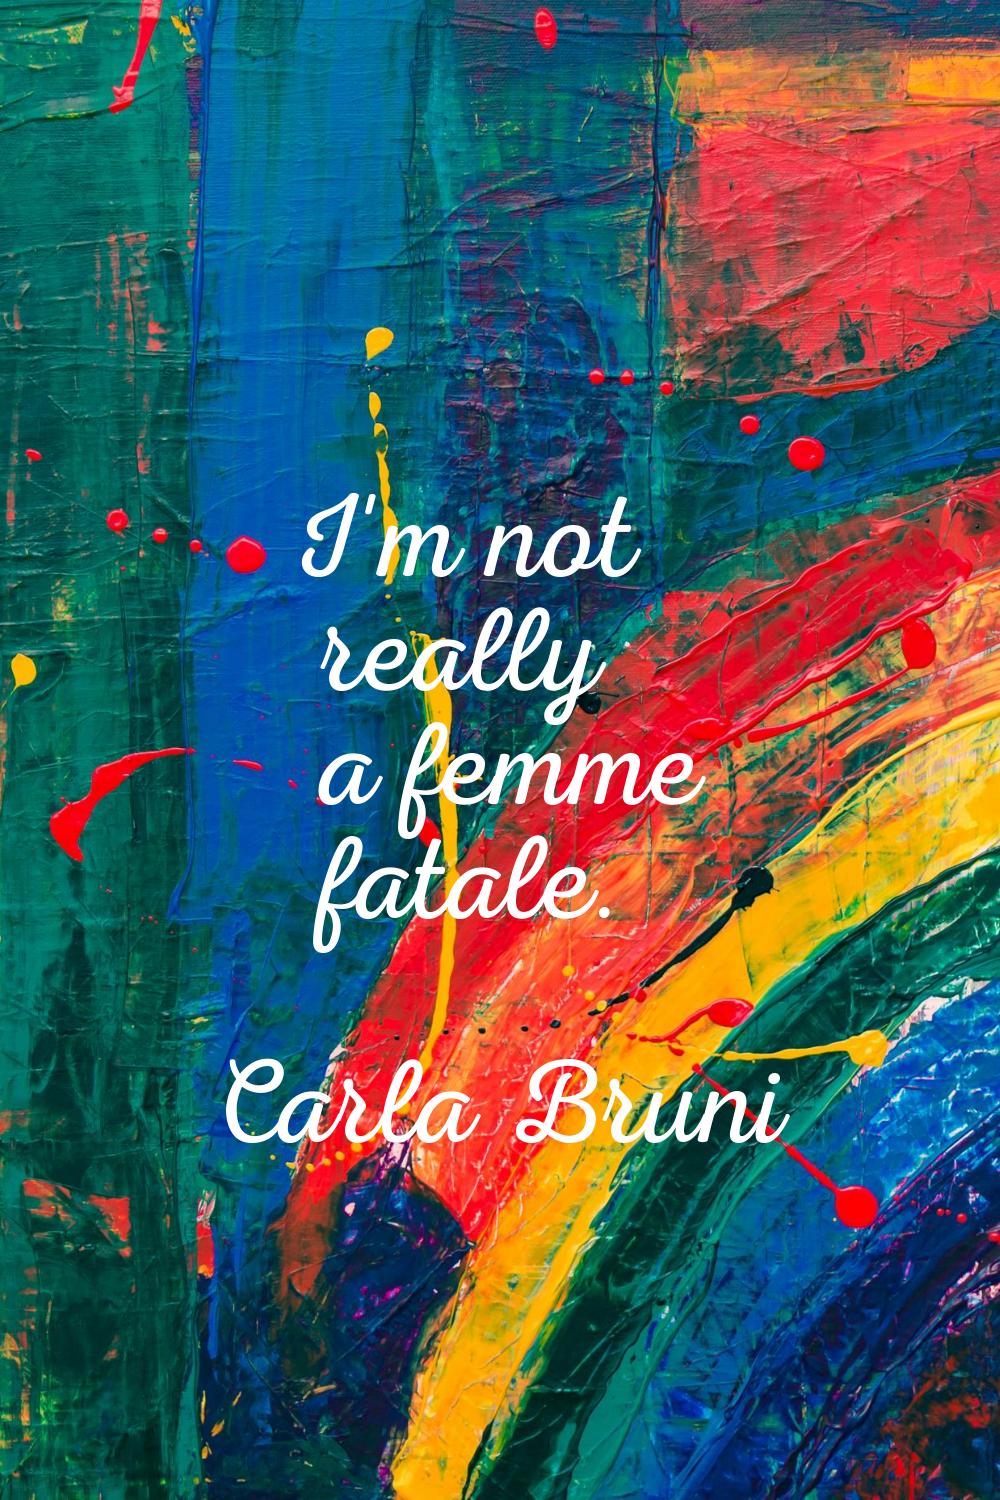 I'm not really a femme fatale.